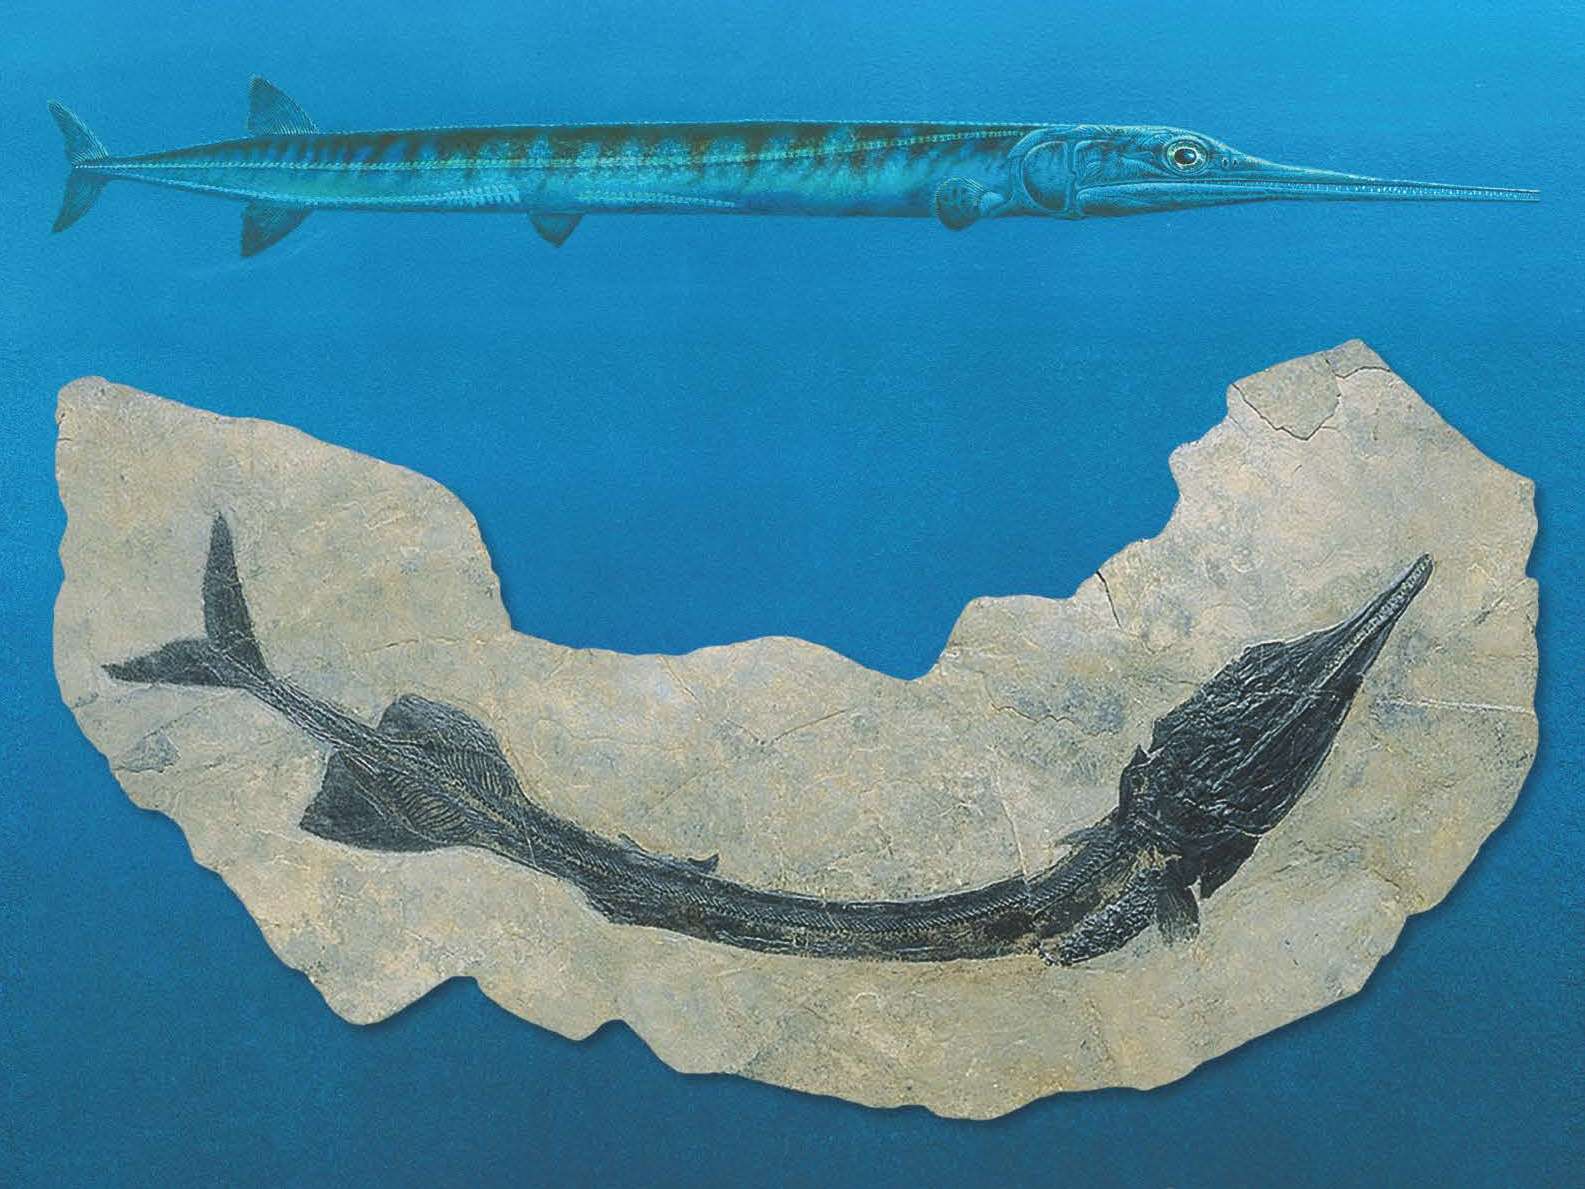 Enlarged view: Fossilised Saurichthys